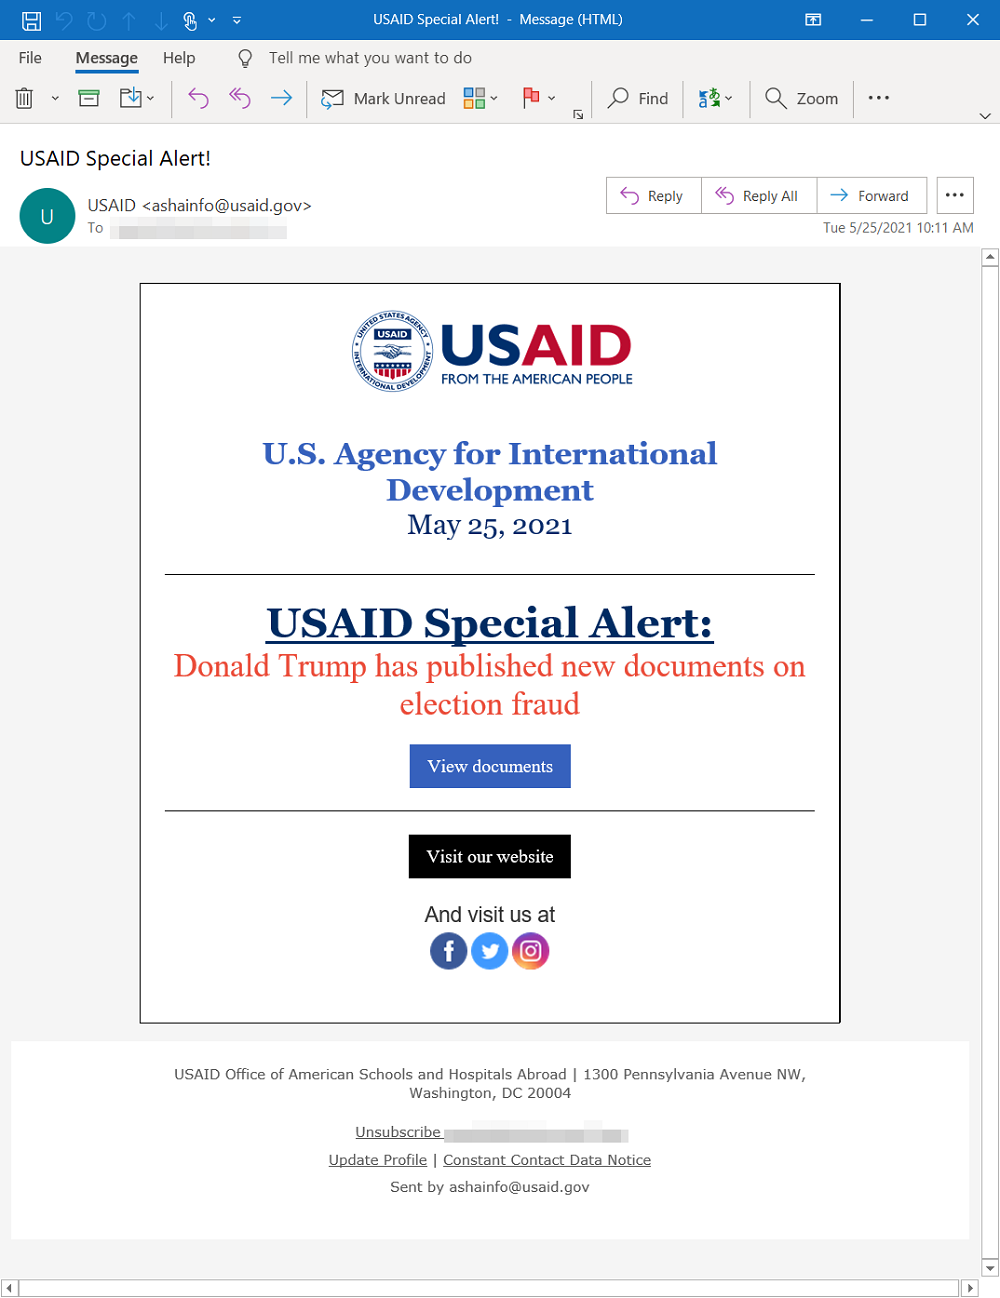 Microsoft warns of current Nobelium phishing campaign impersonating USAID